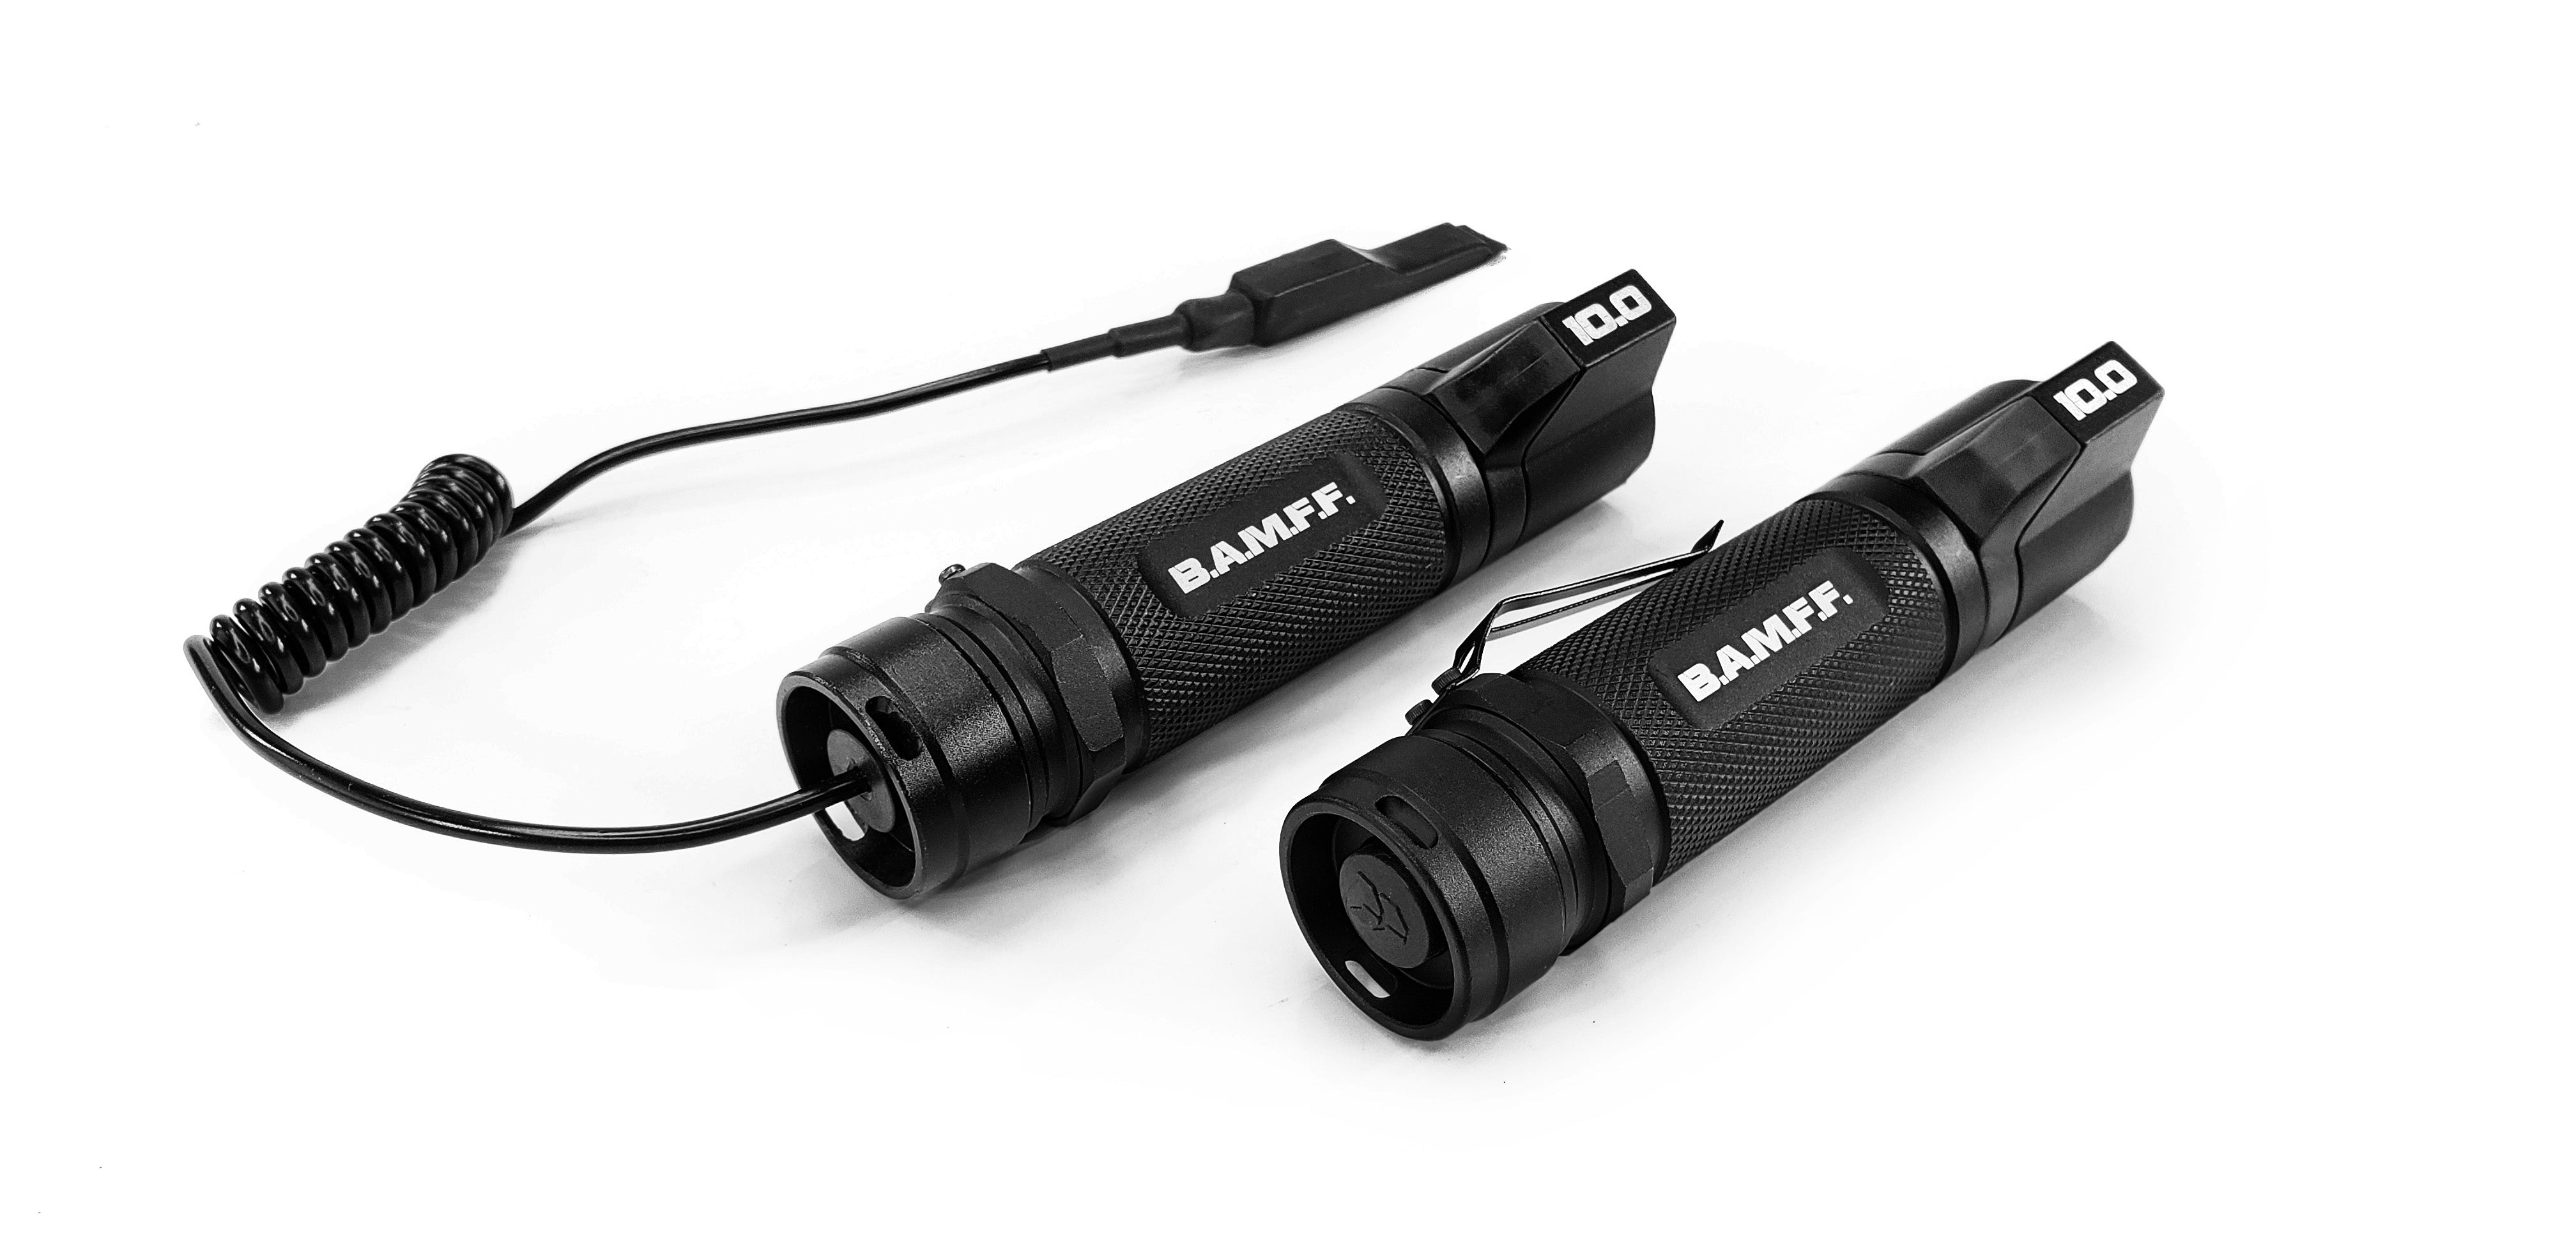 Two BAMFF tactical flashlights side by side. One with a pressure switch and one with a standard cap switch.